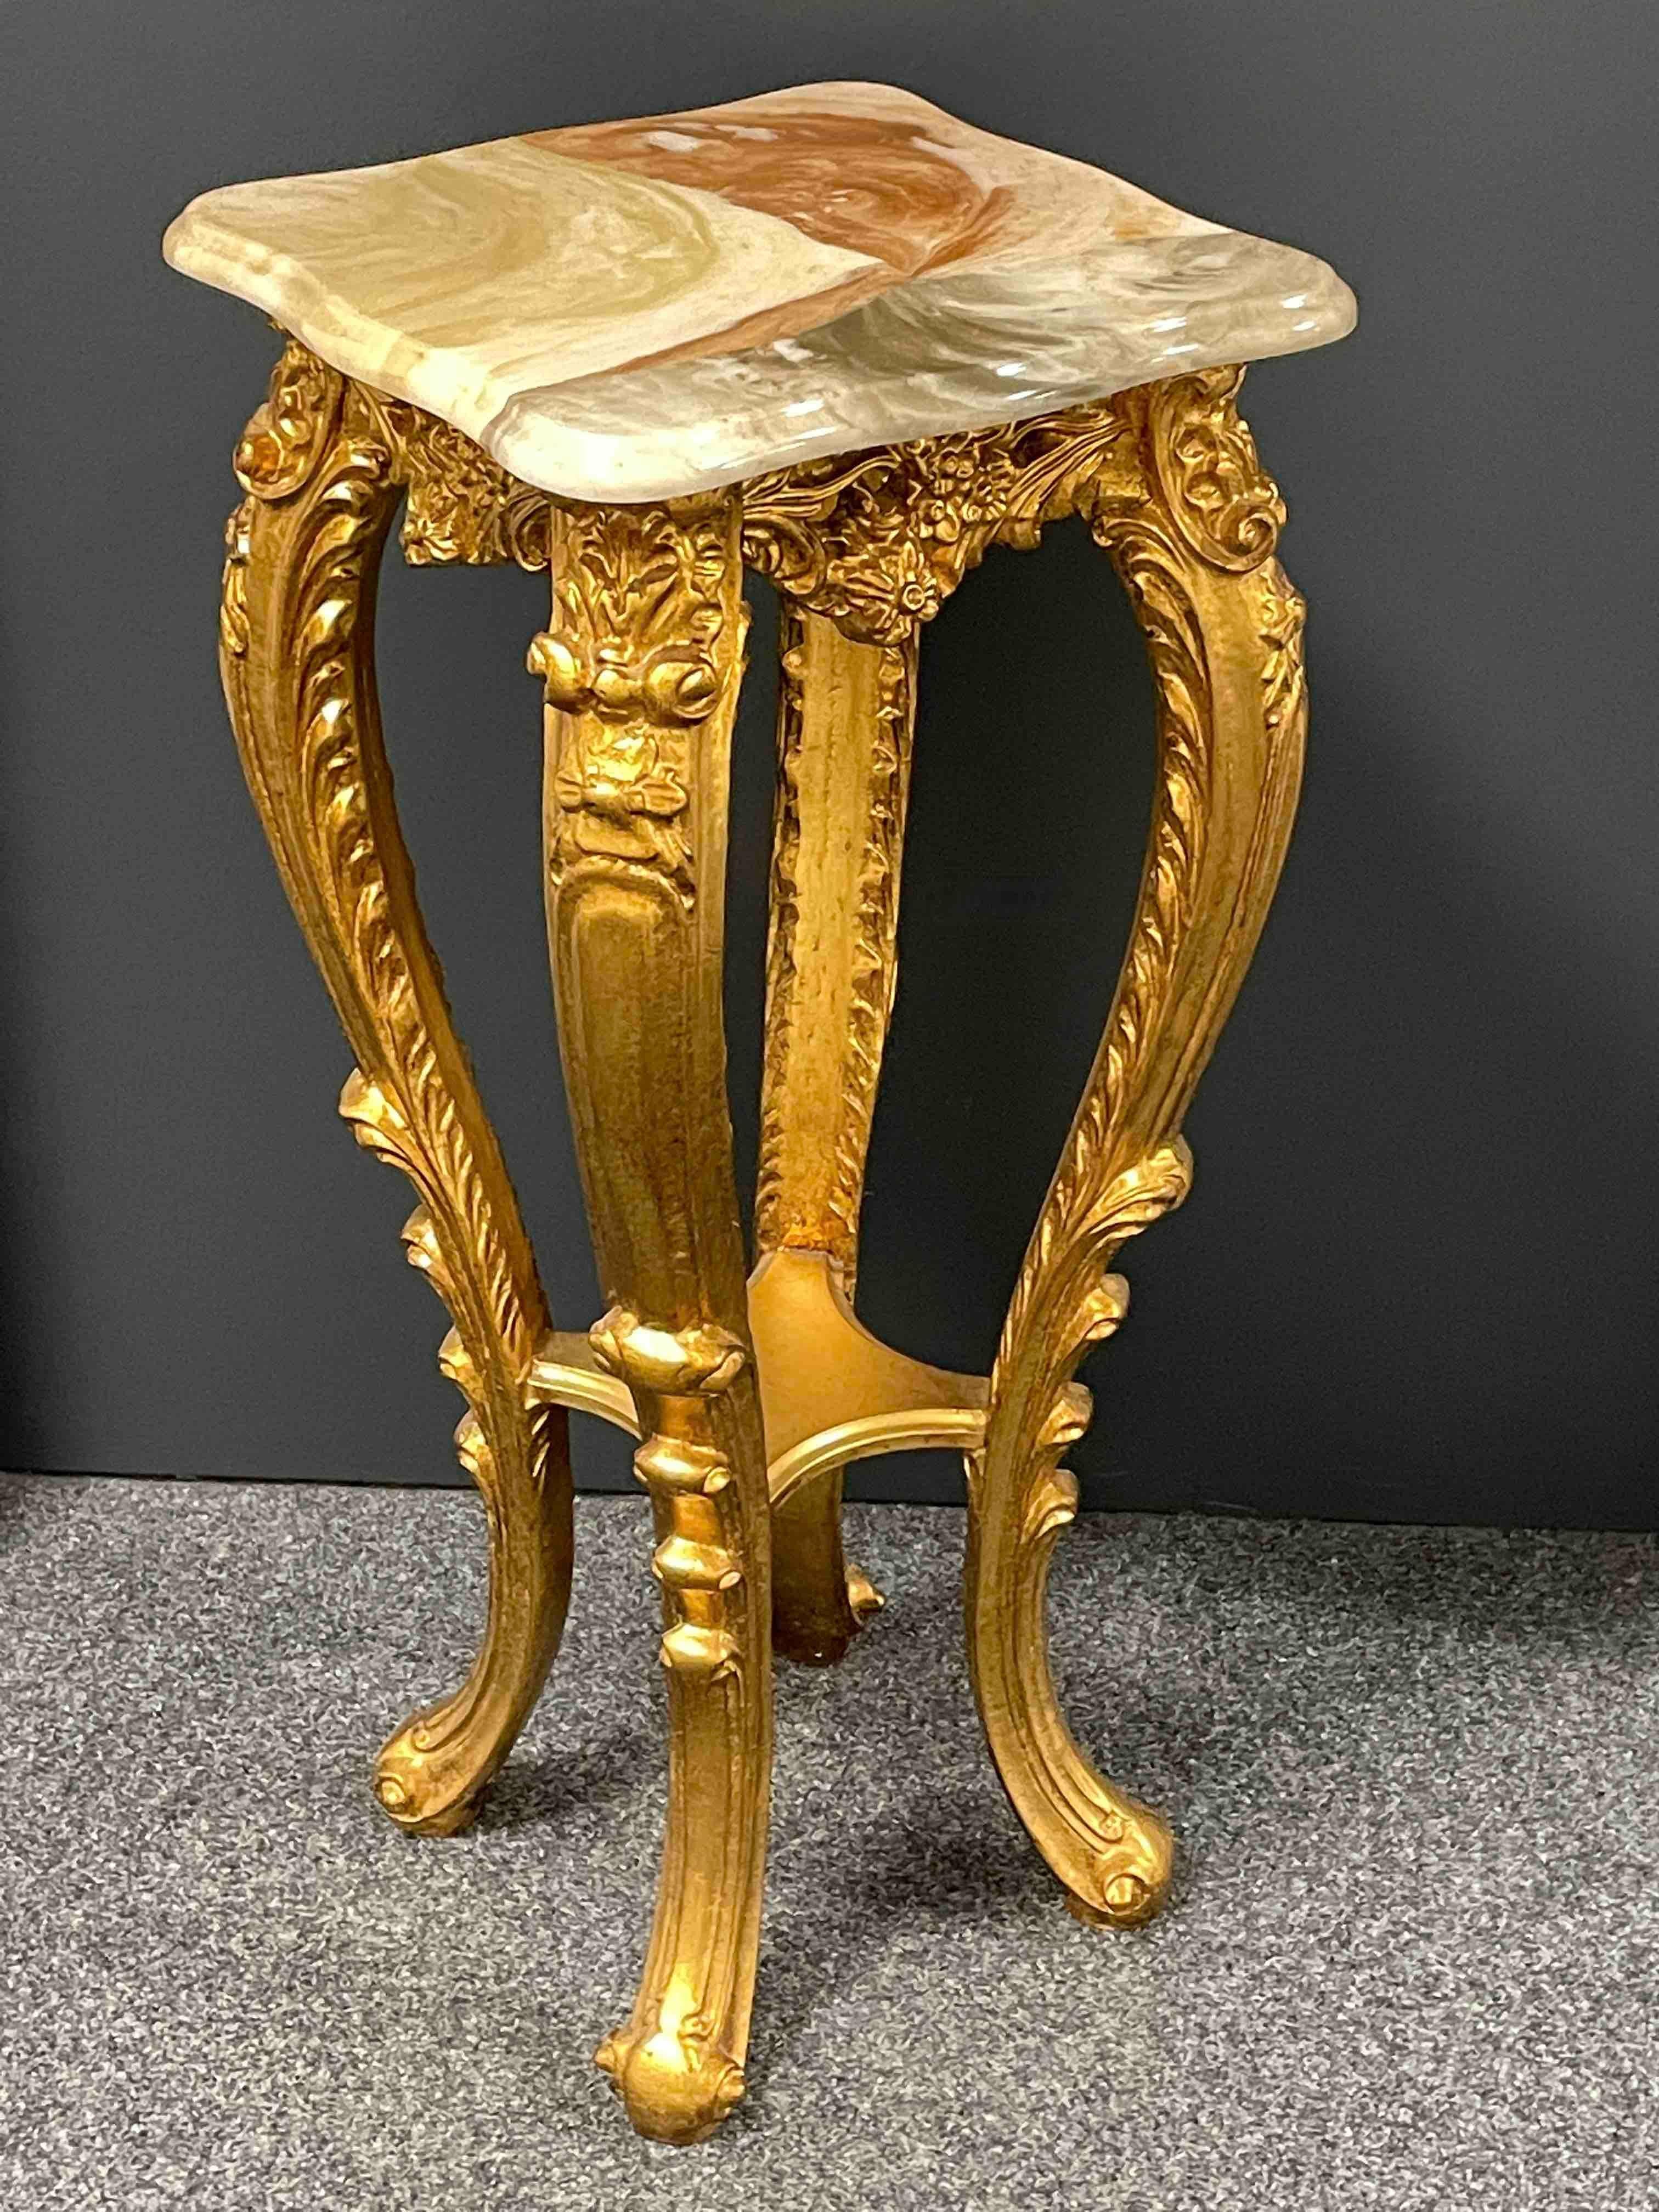 20th Century Carved Gilt Wood Toleware Console Pedestal Table, Italy For Sale 7